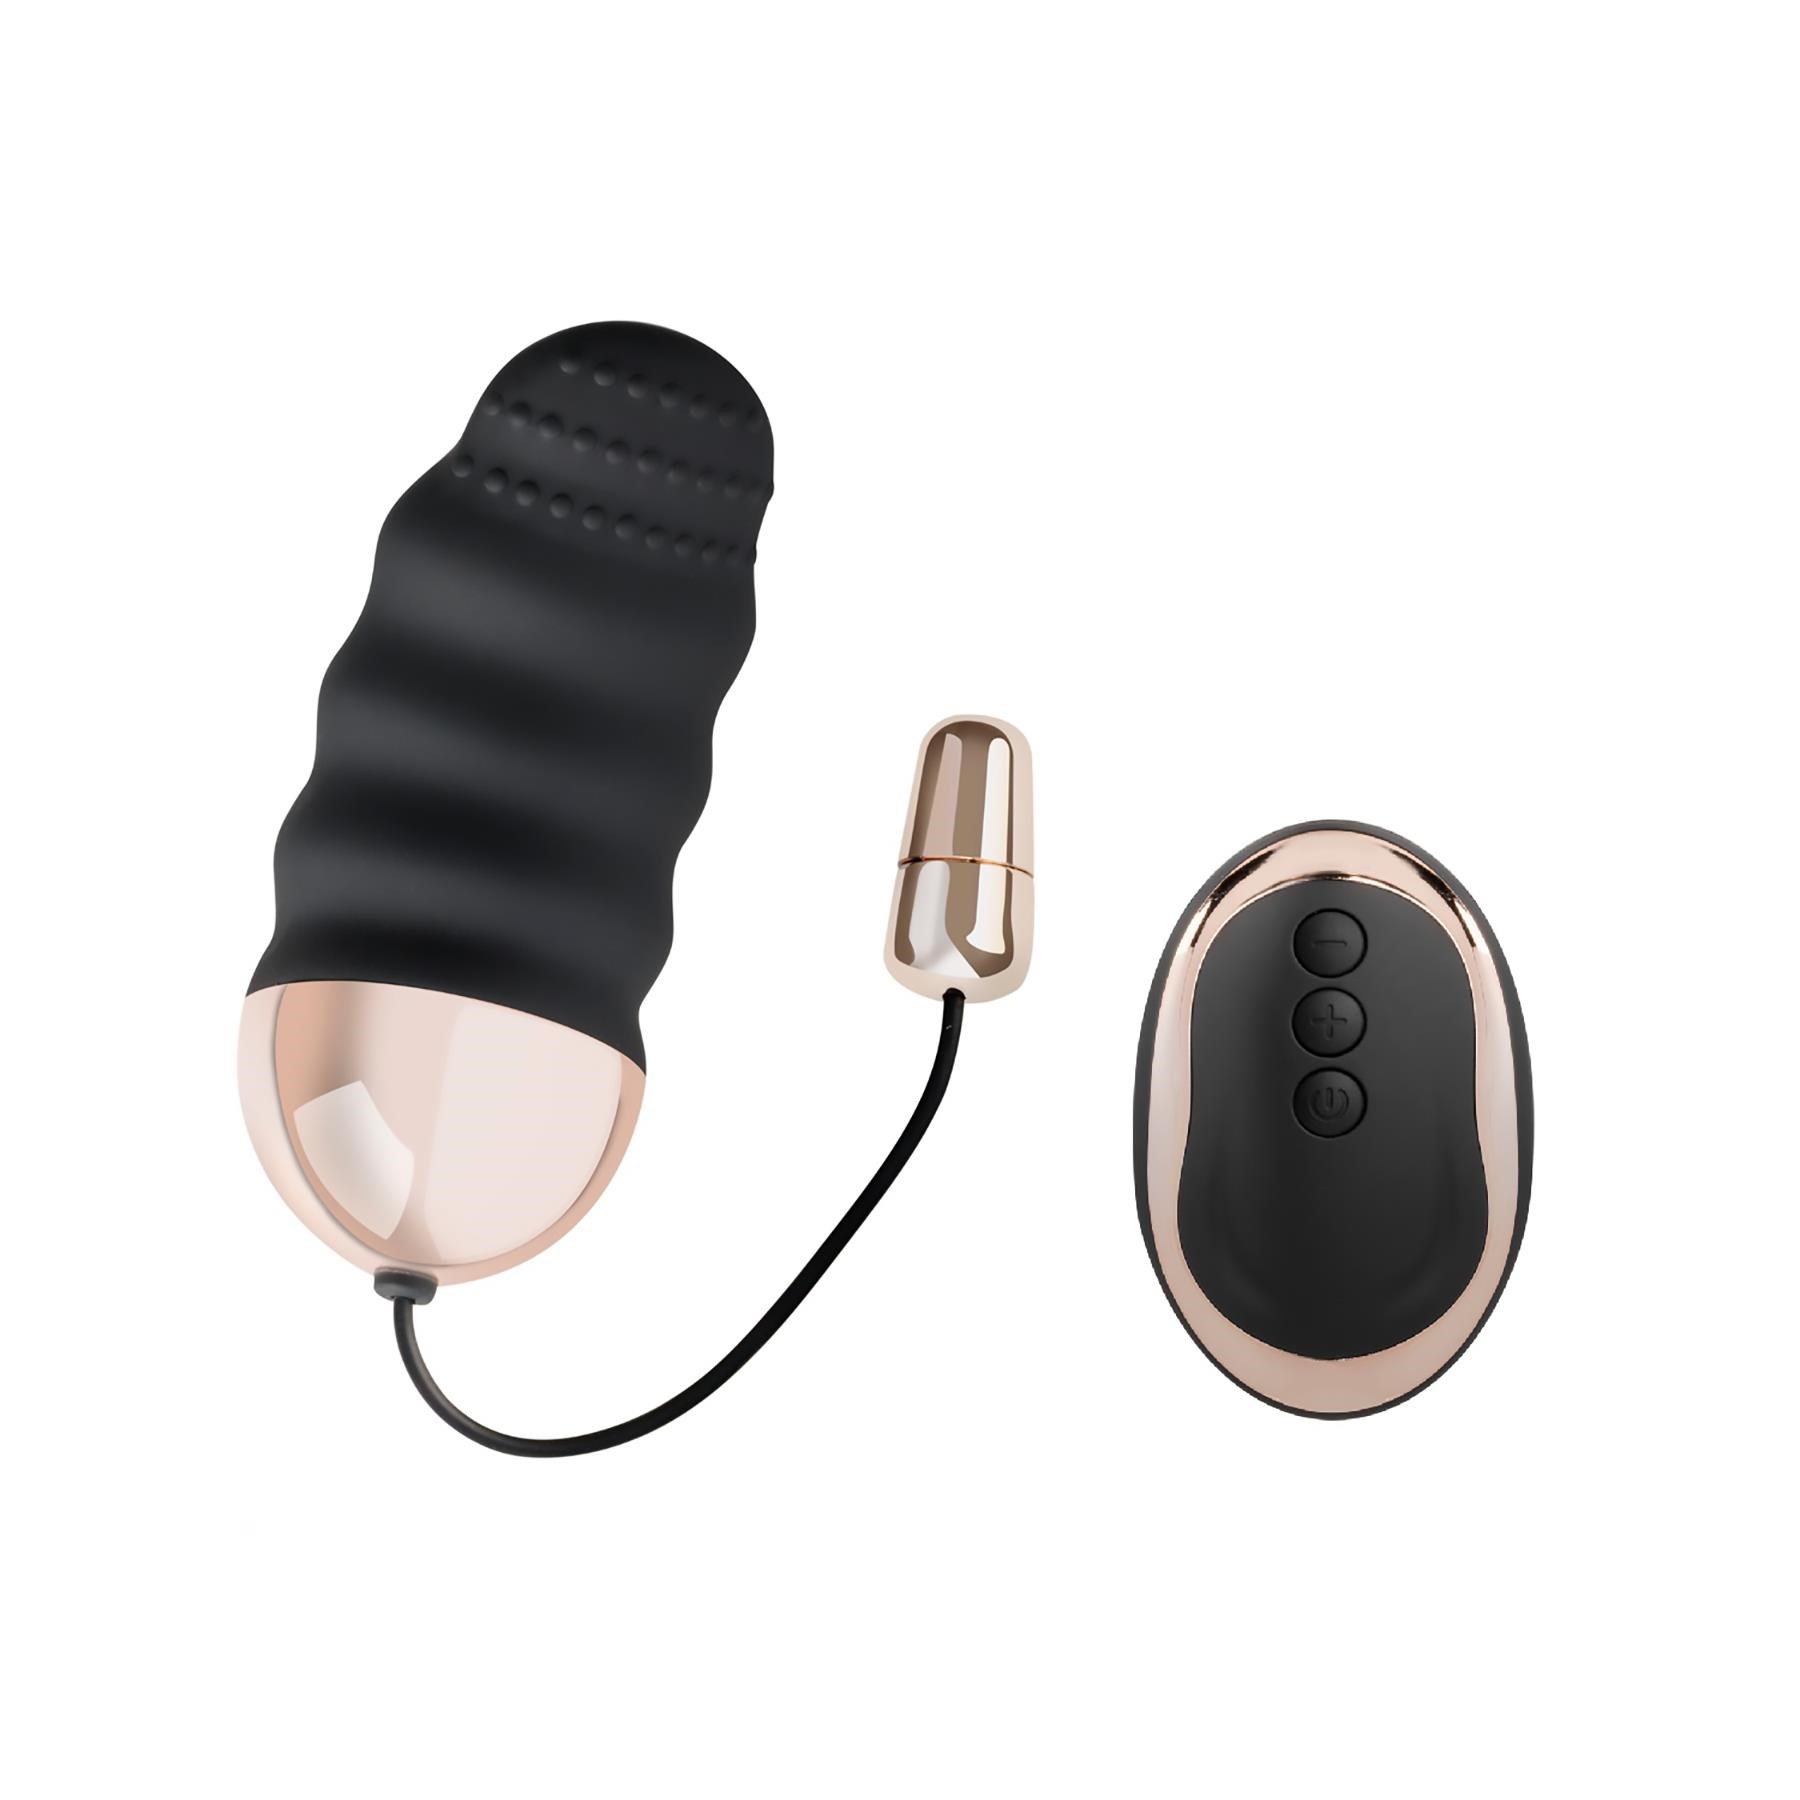 Loveboxxx Solo Gift Set - Bullet Vibe and Remote